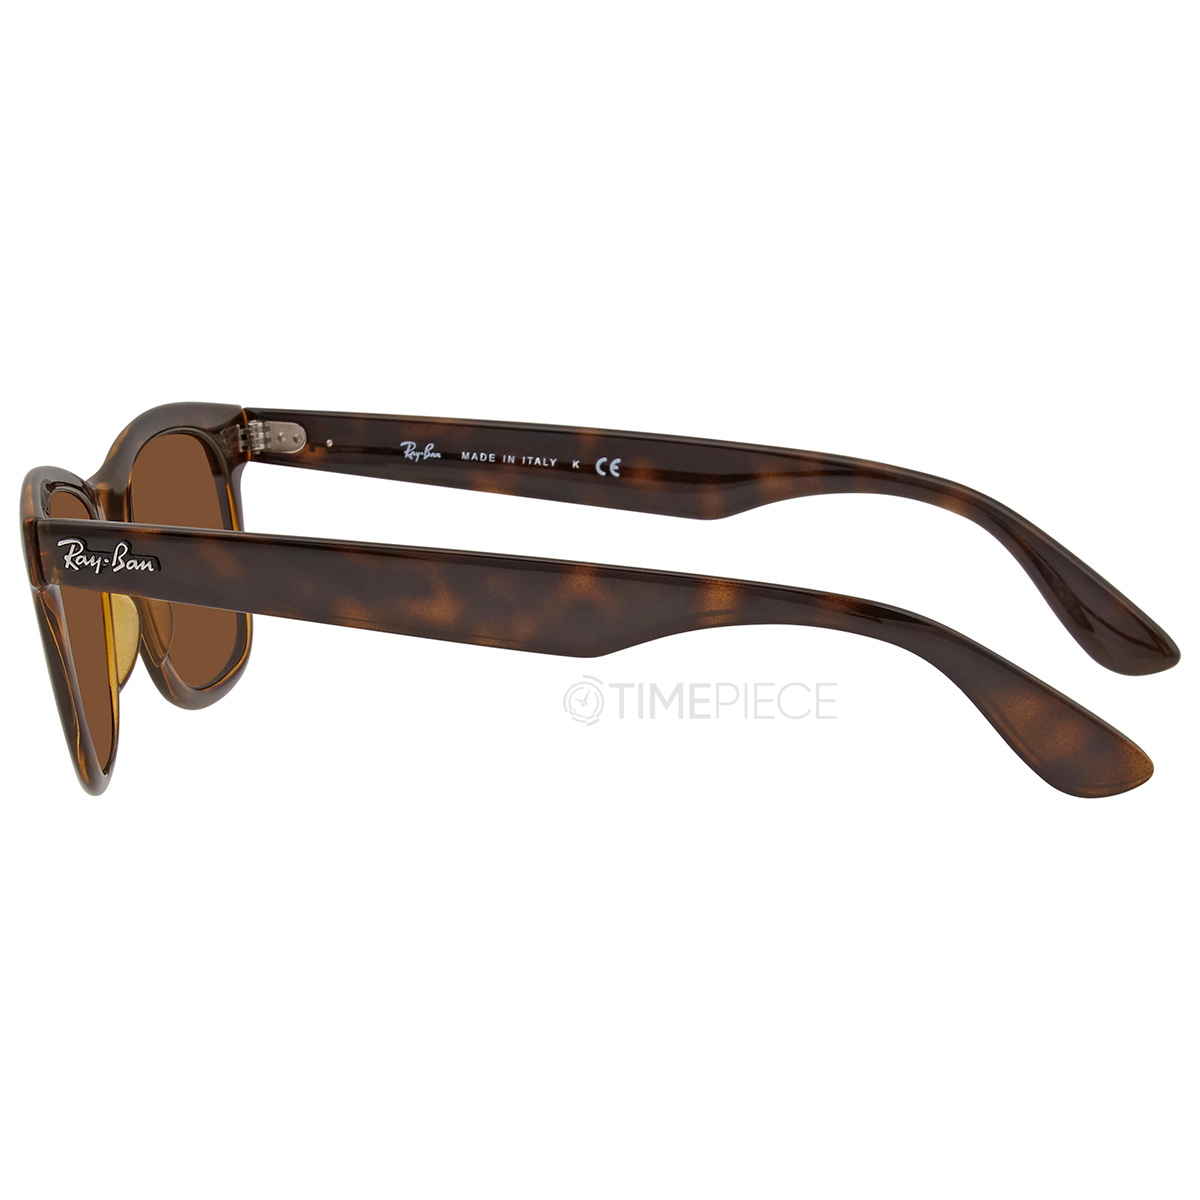 Ray Ban Brown Square Unisex Sunglasses RB4640 710/33 50